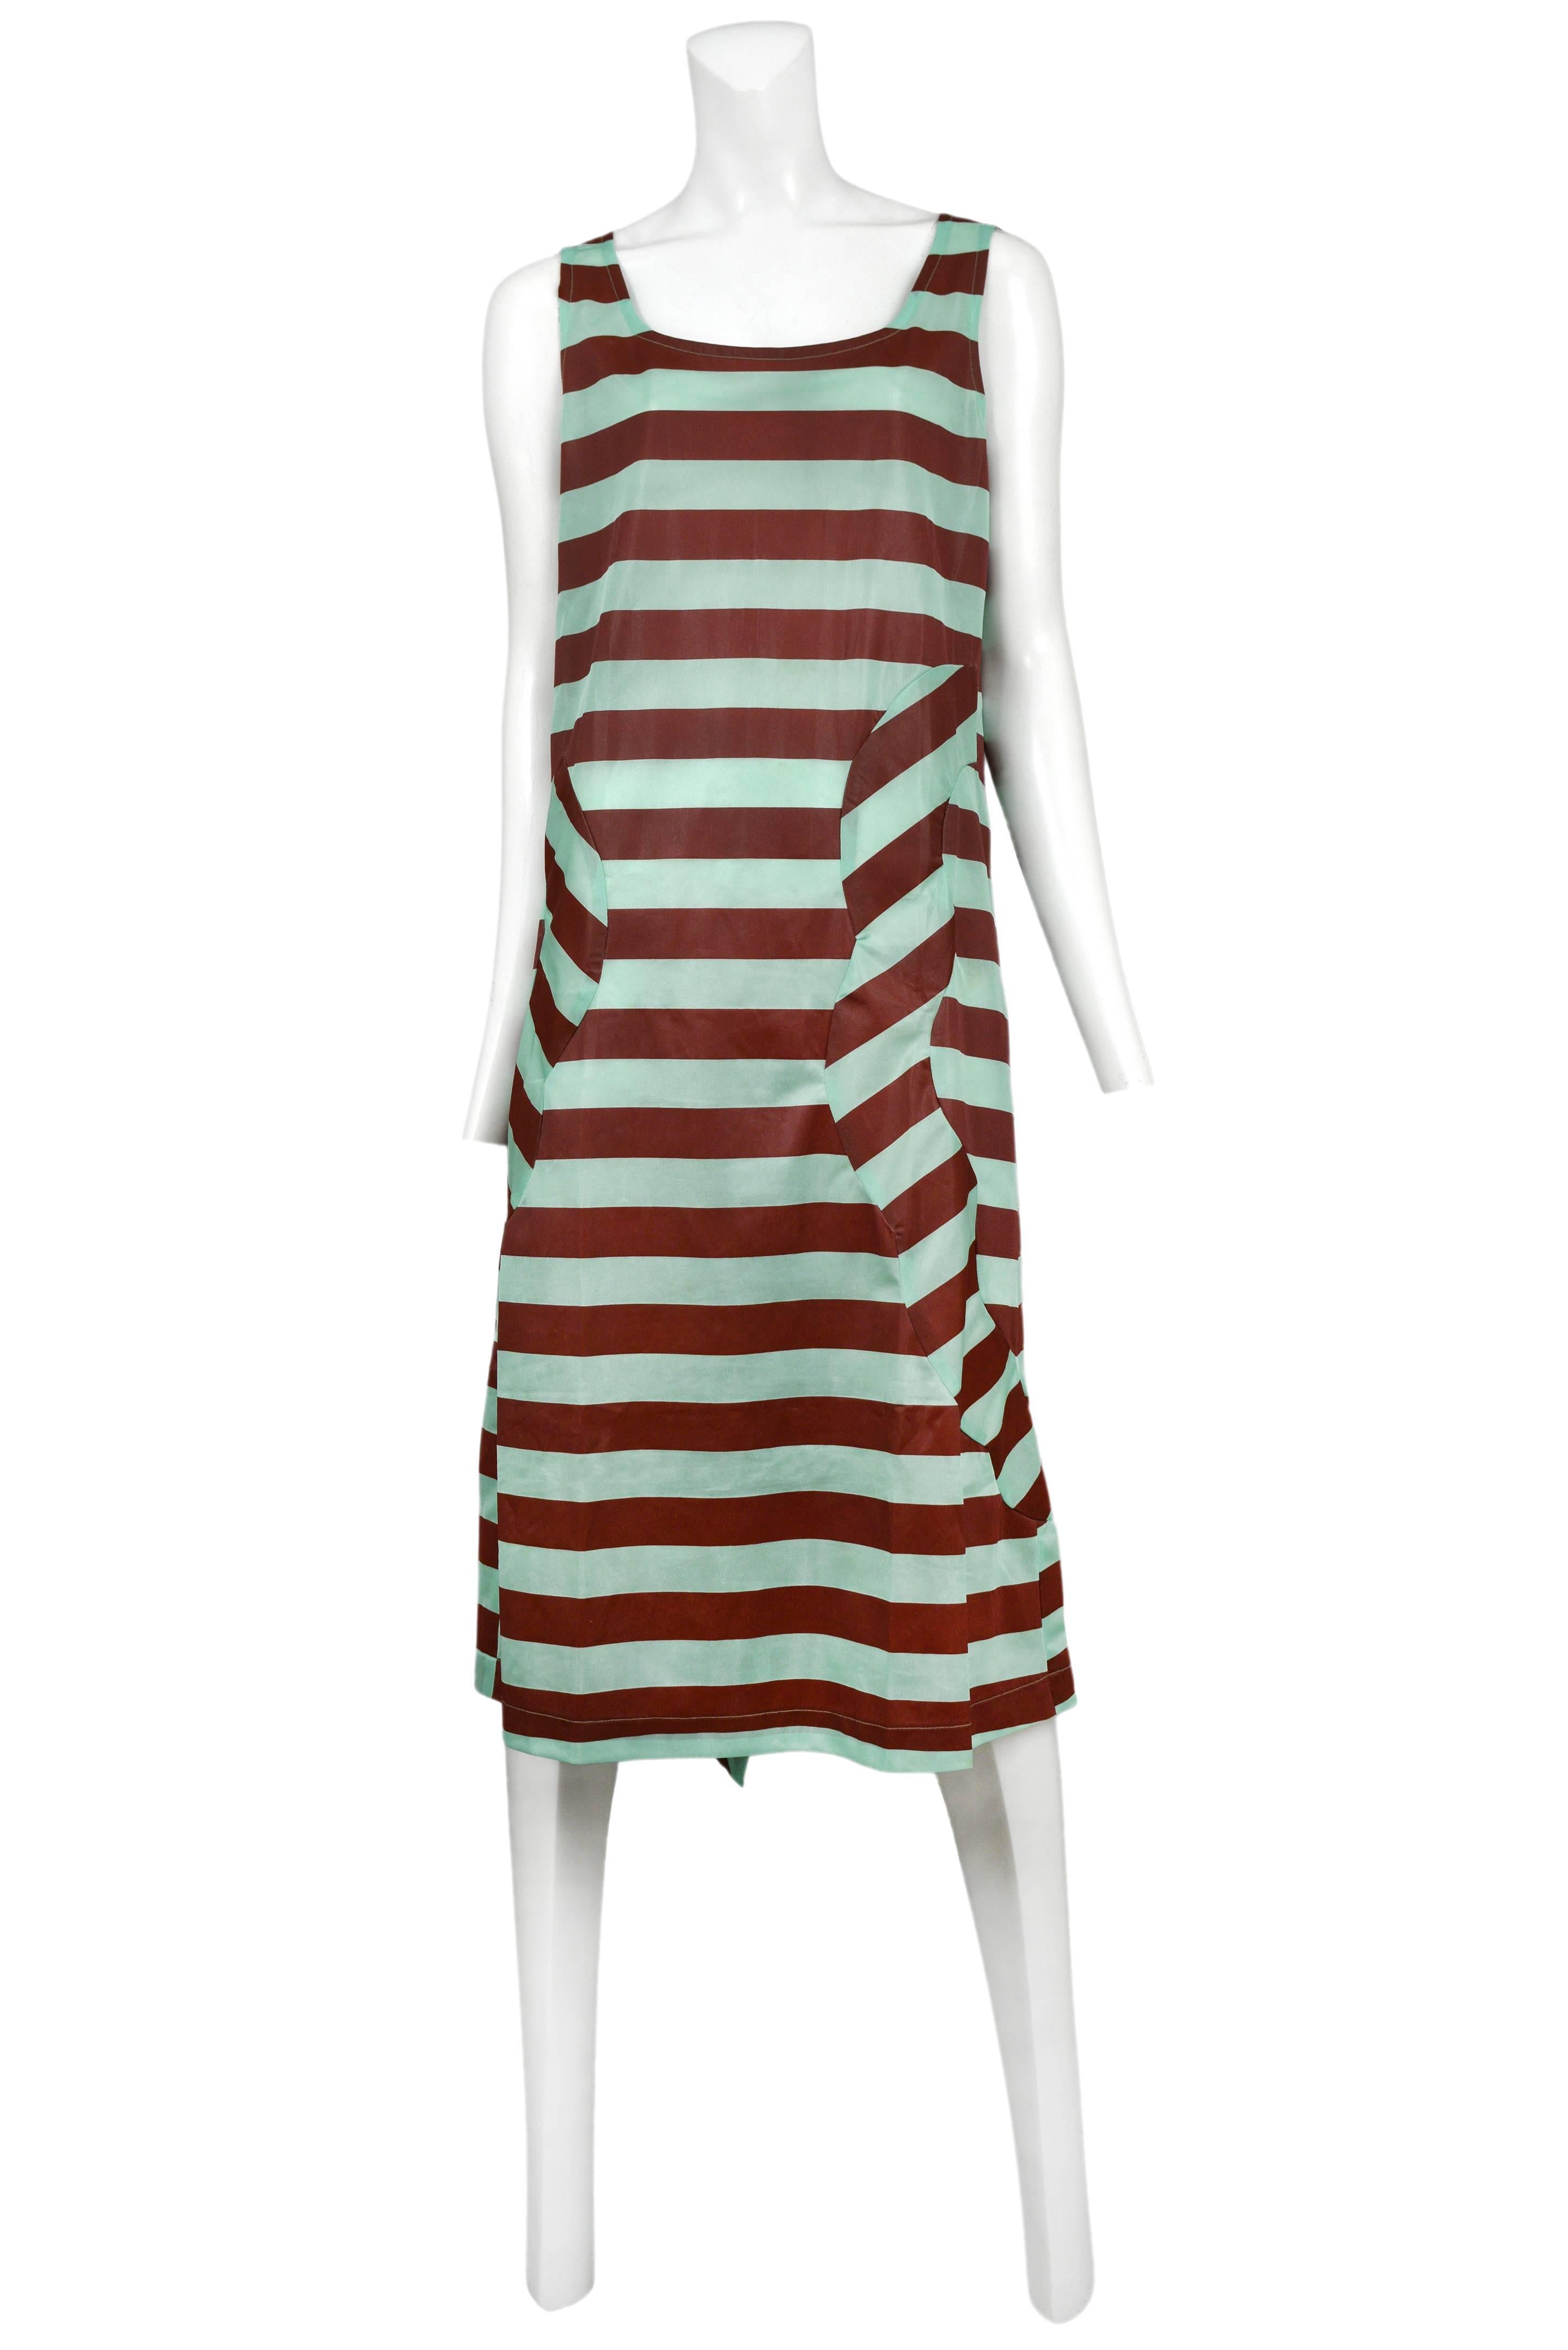 Vintage Comme des Garcons tank dress featuring horizontal rust and mint green stripes. Circa 1996.
Please inquire for additional images.